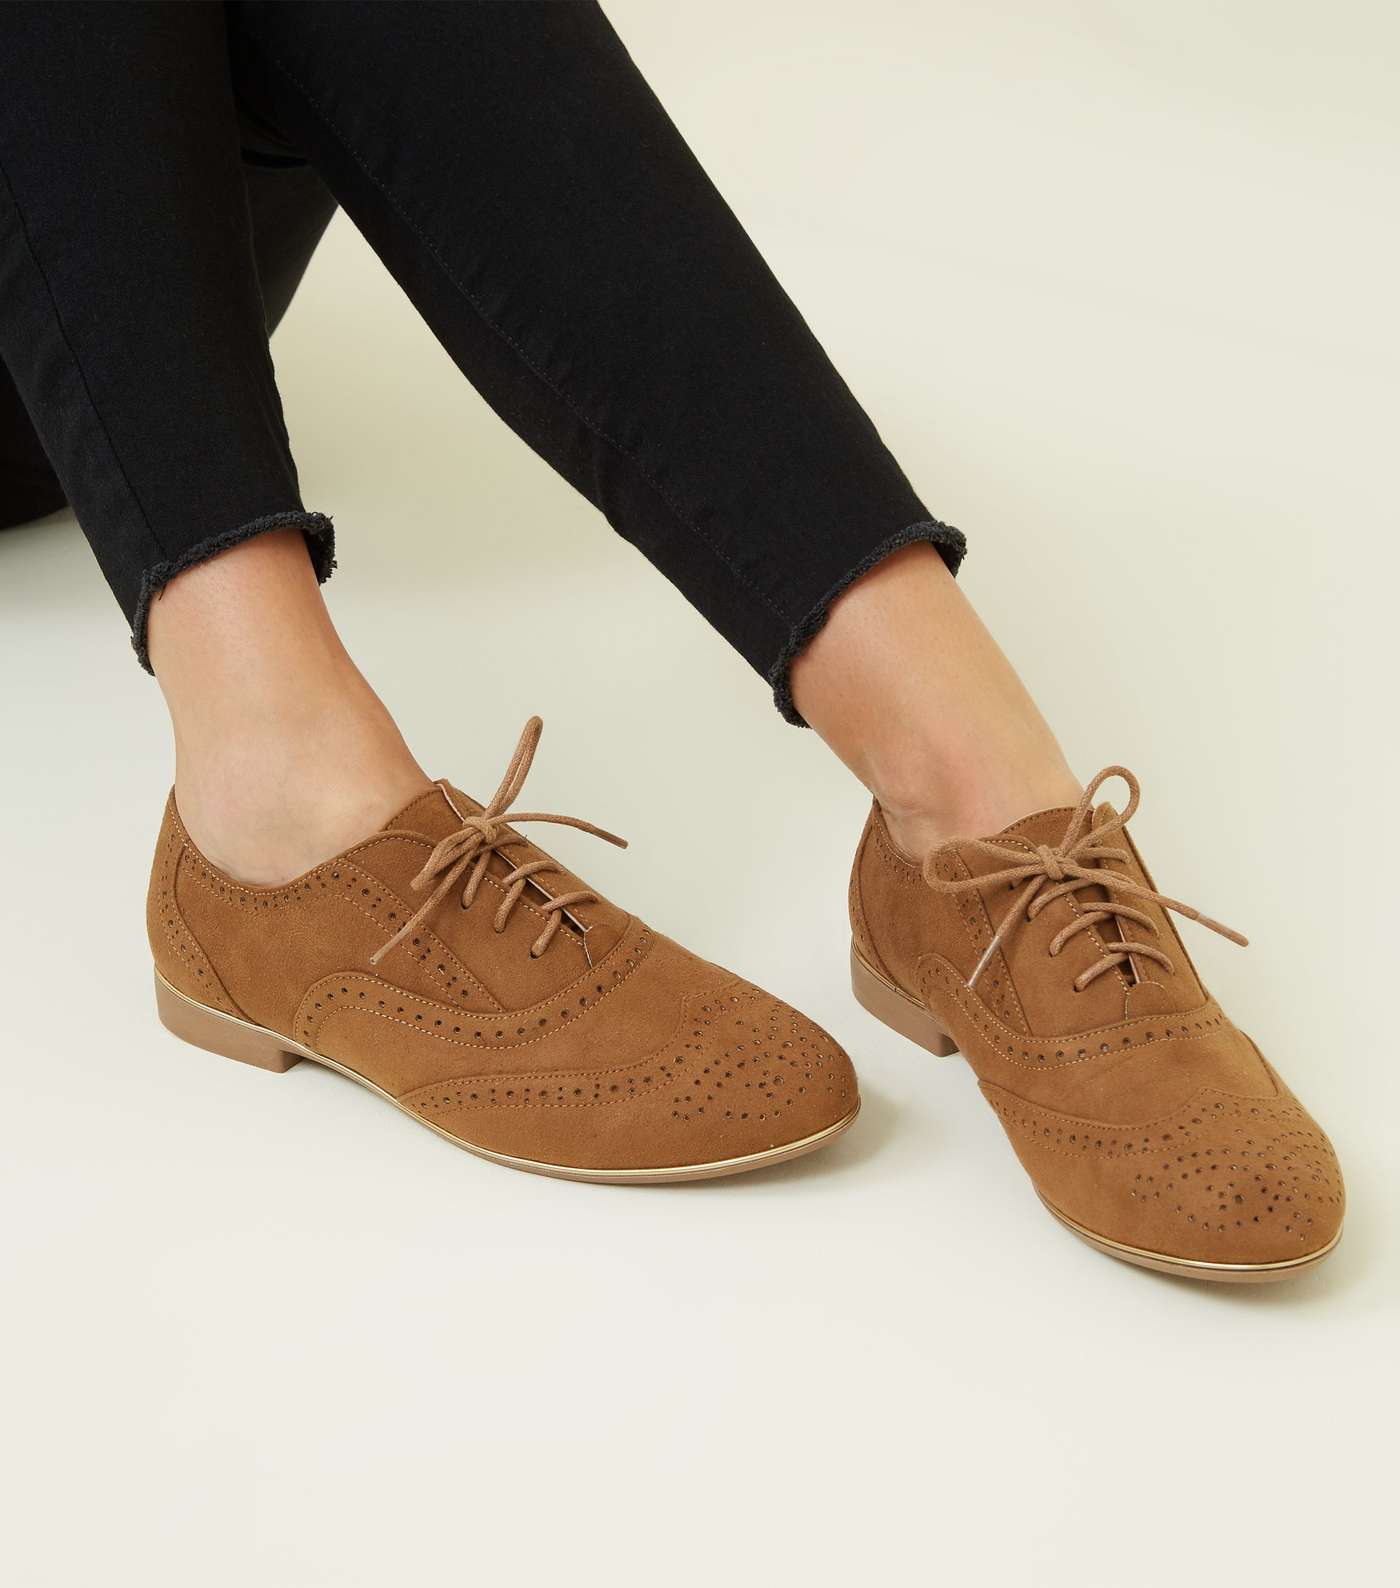 Wide Fit Tan Suedette Piped Edge Brogues Image 2